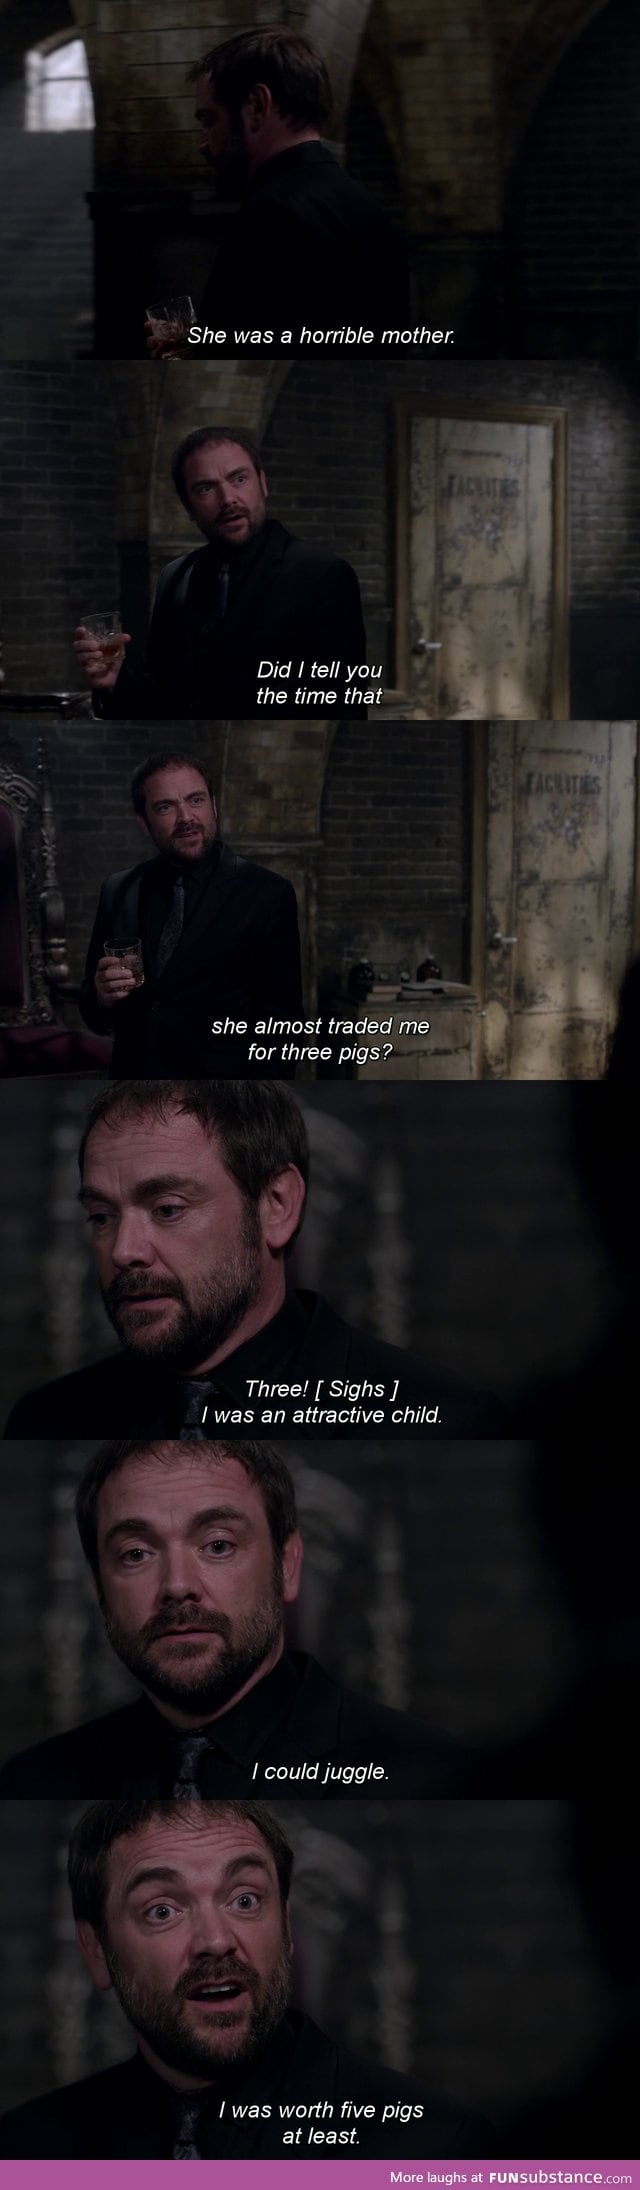 Crowley had a horrible mother